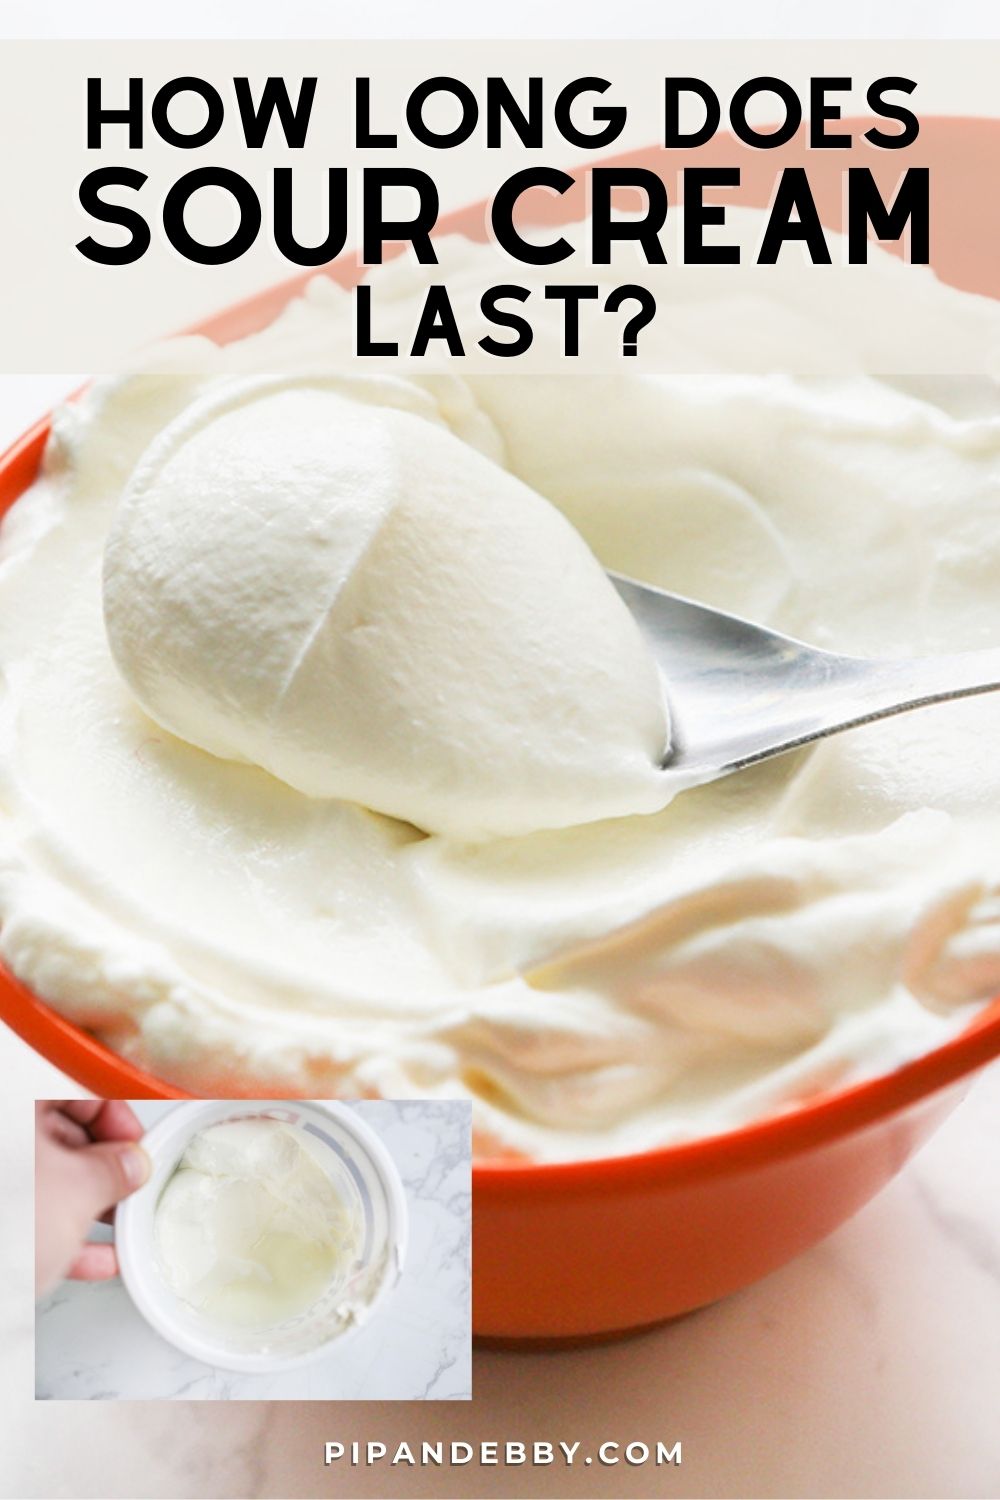 Photo of a bowl of sour cream with text overlay reading, "How long does sour cream last?"